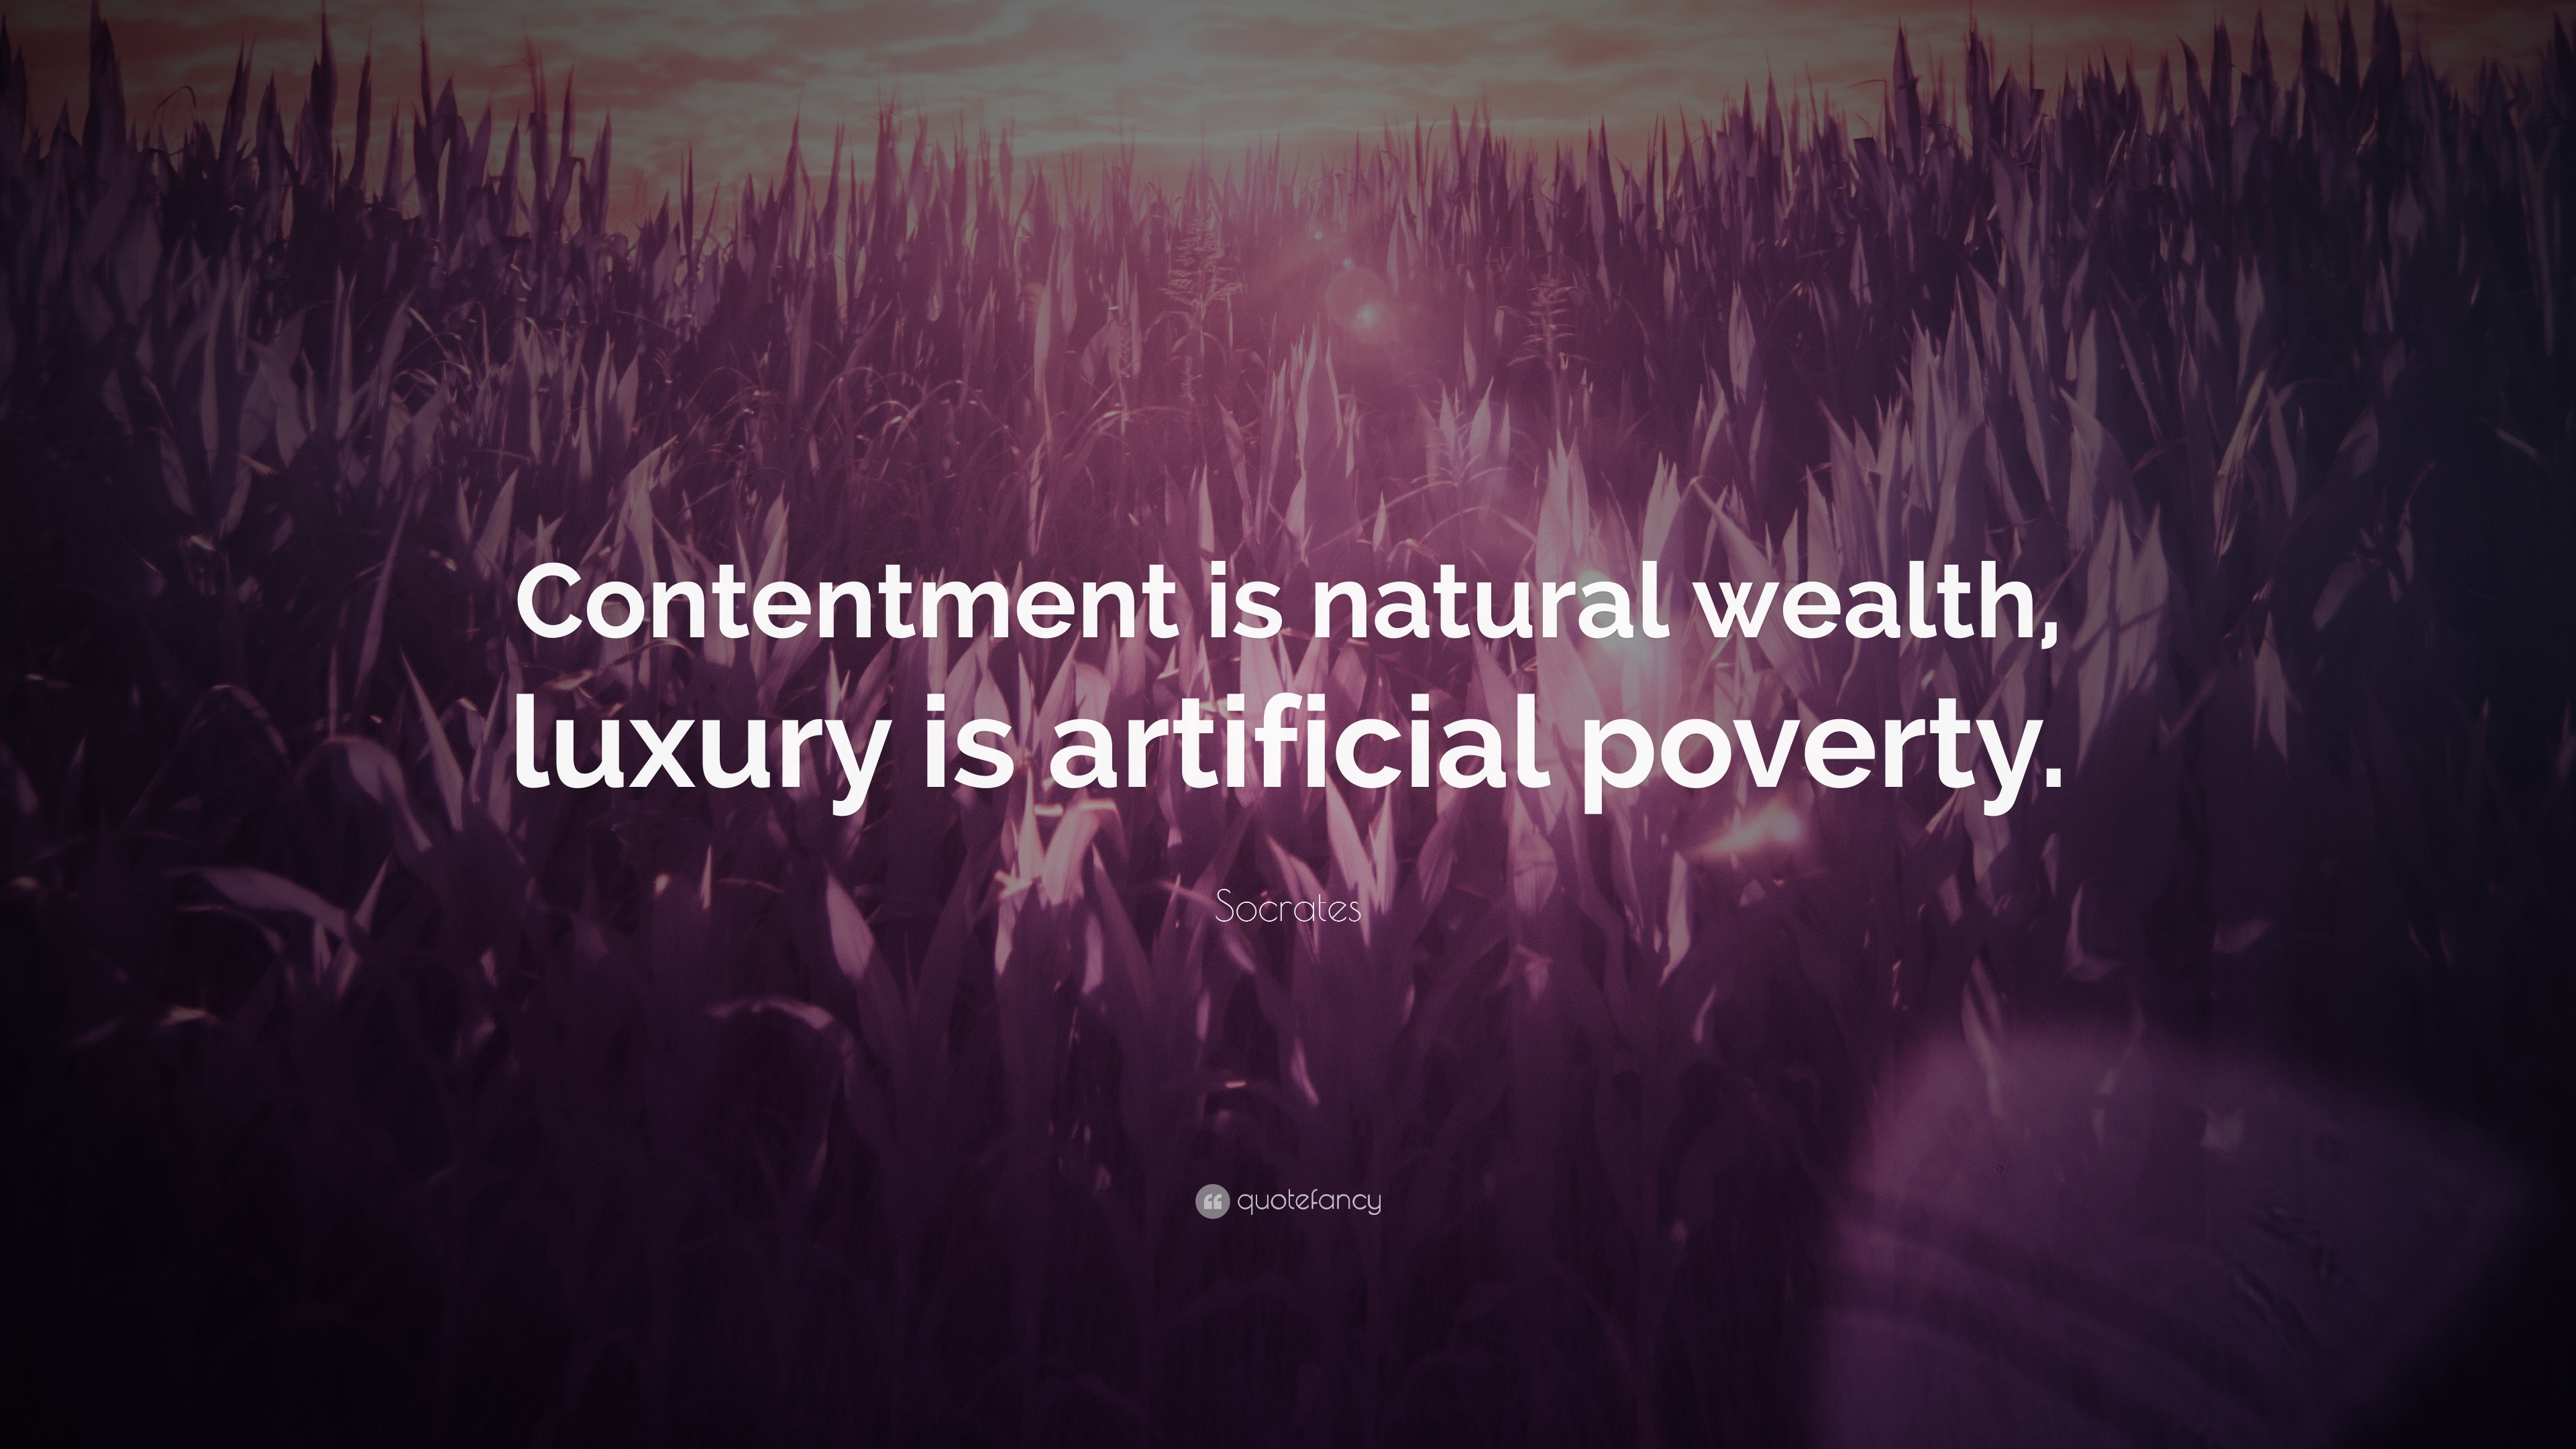 Socrates Quote: “Contentment is natural wealth, luxury is artificial